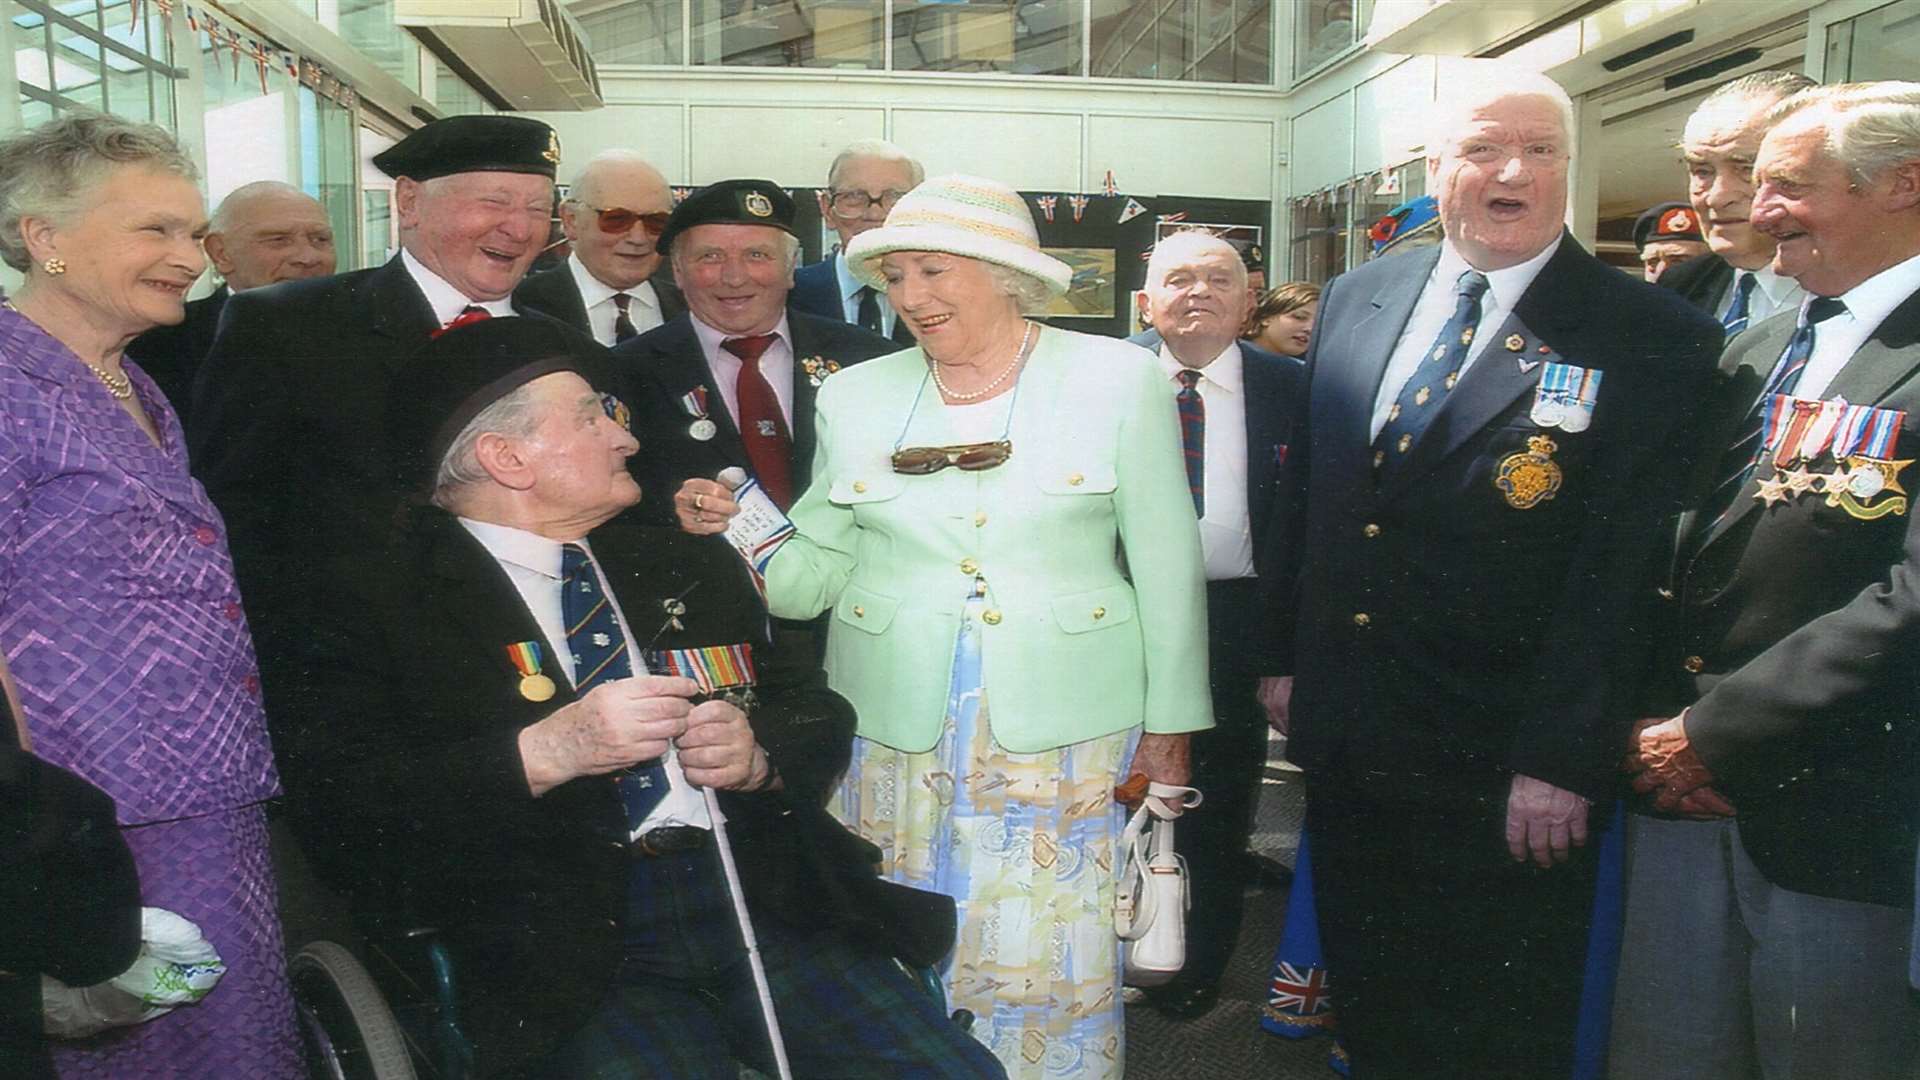 Dame Vera Lynn with veterans including the late Bill Wray from Eastry (behind her left shoulder) outside Asda in Canterbury